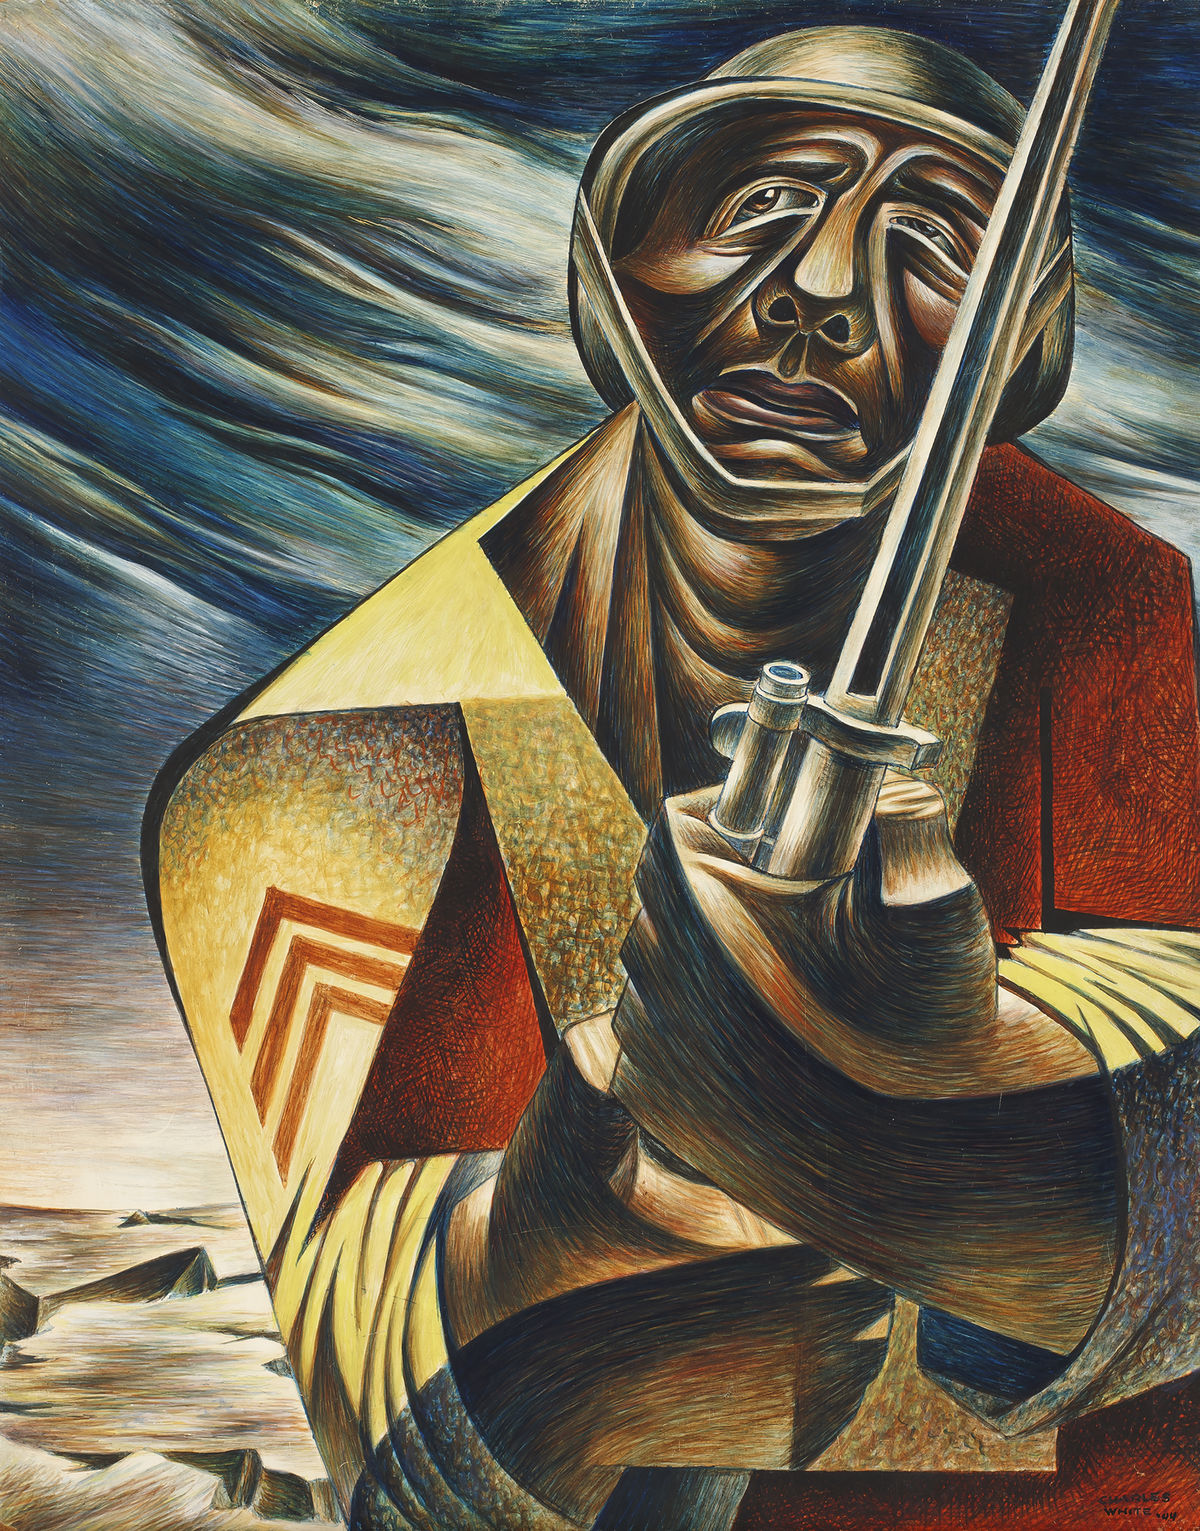 Comprehensive retrospective of AfricanAmerican artist Charles White at